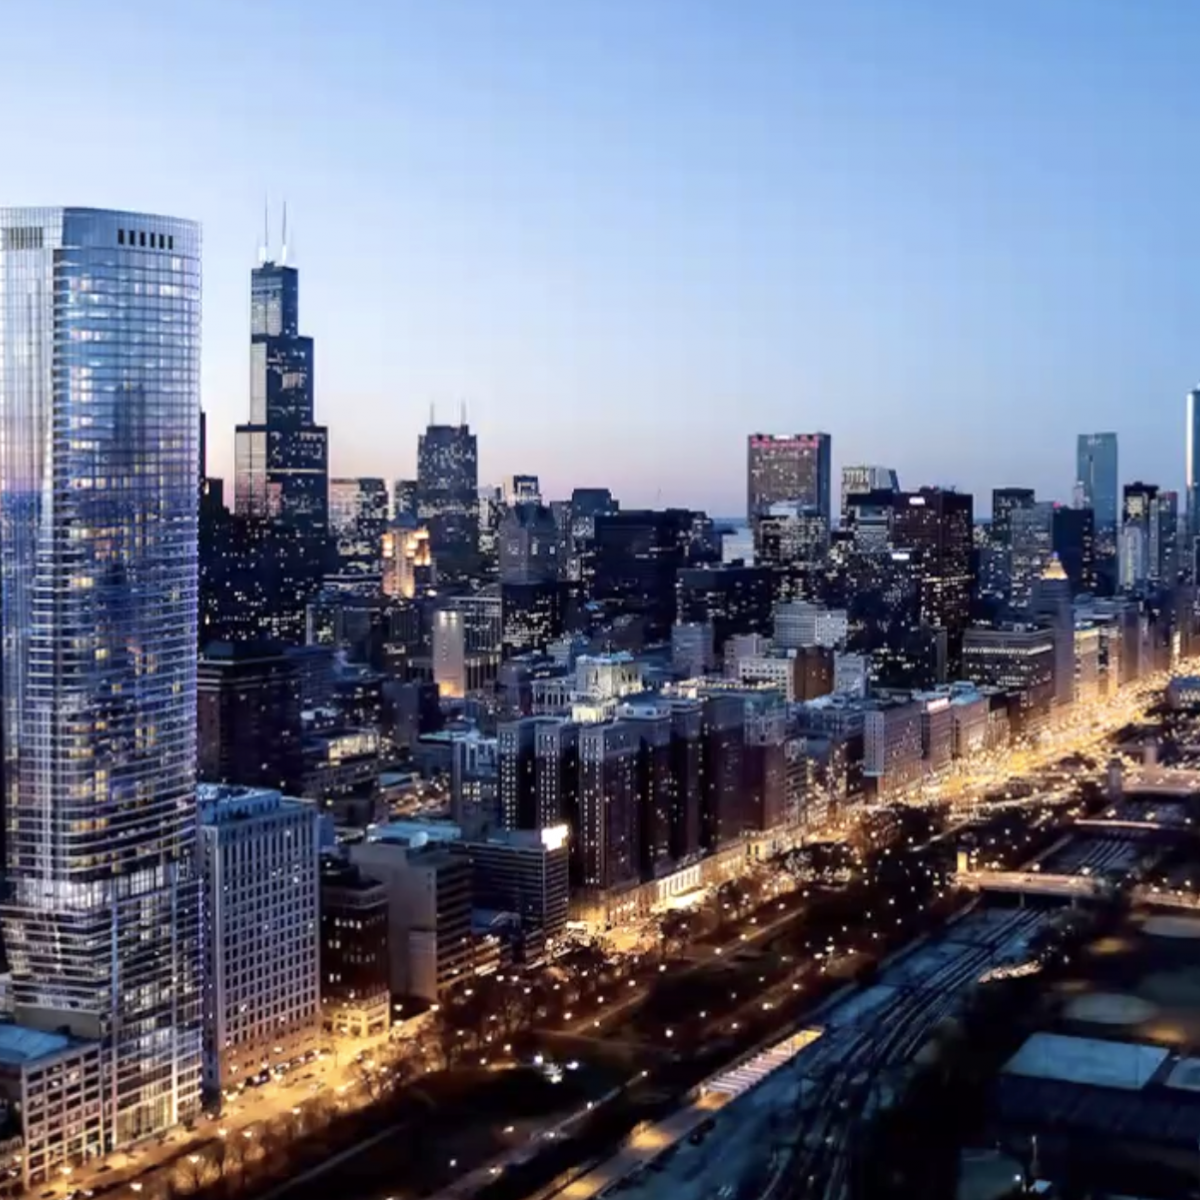 Developers behind 73-story Michigan Avenue apartment tower offering rooms  with a view - Chicago Sun-Times